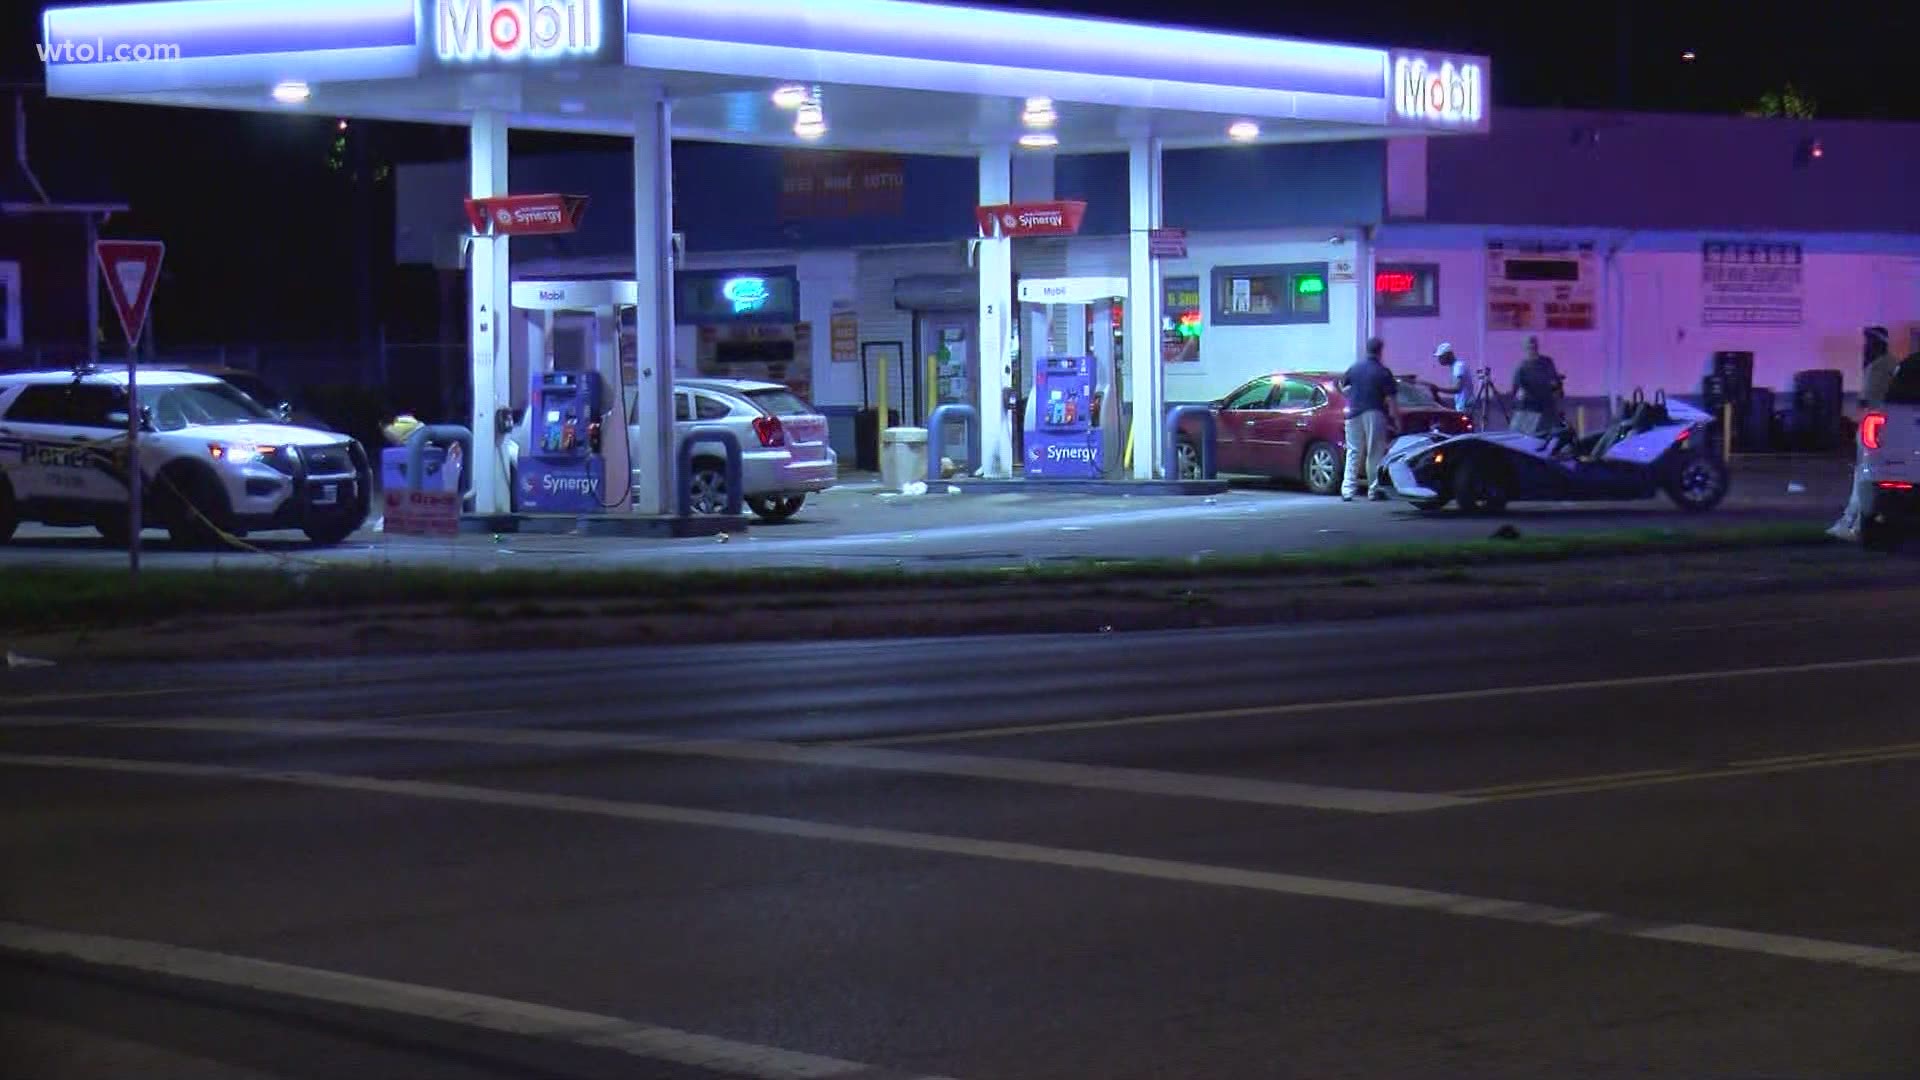 The shooting involved one victim at the gas station, located at the intersection of Central Avenue and North Detroit Avenue.